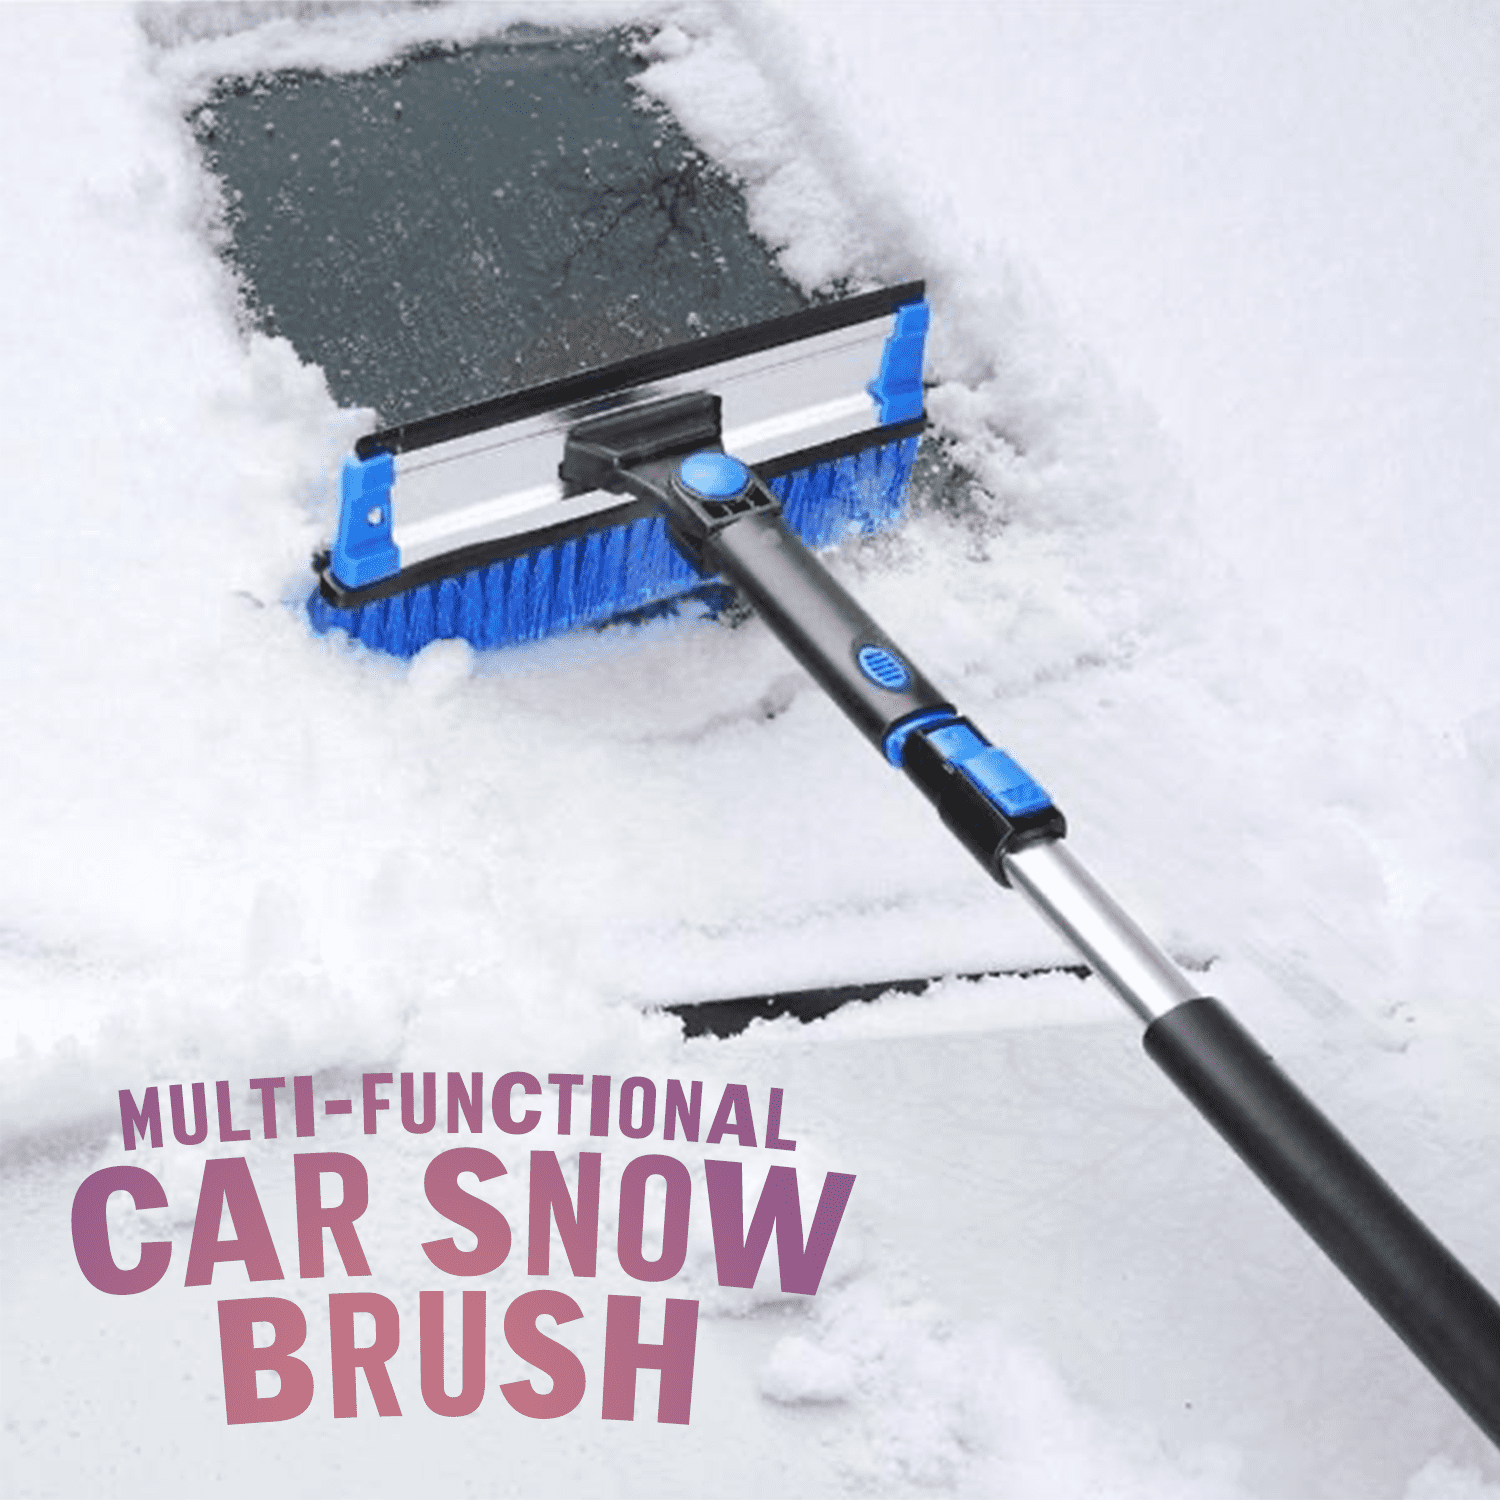 Ice Scraper and Snow Brush, 7 in 1 Detachable Snow Brush for Car Windshield, 23.5 to 40 Extendable Snow Shovel with Squeegee, Gloves, 360°Pivoting